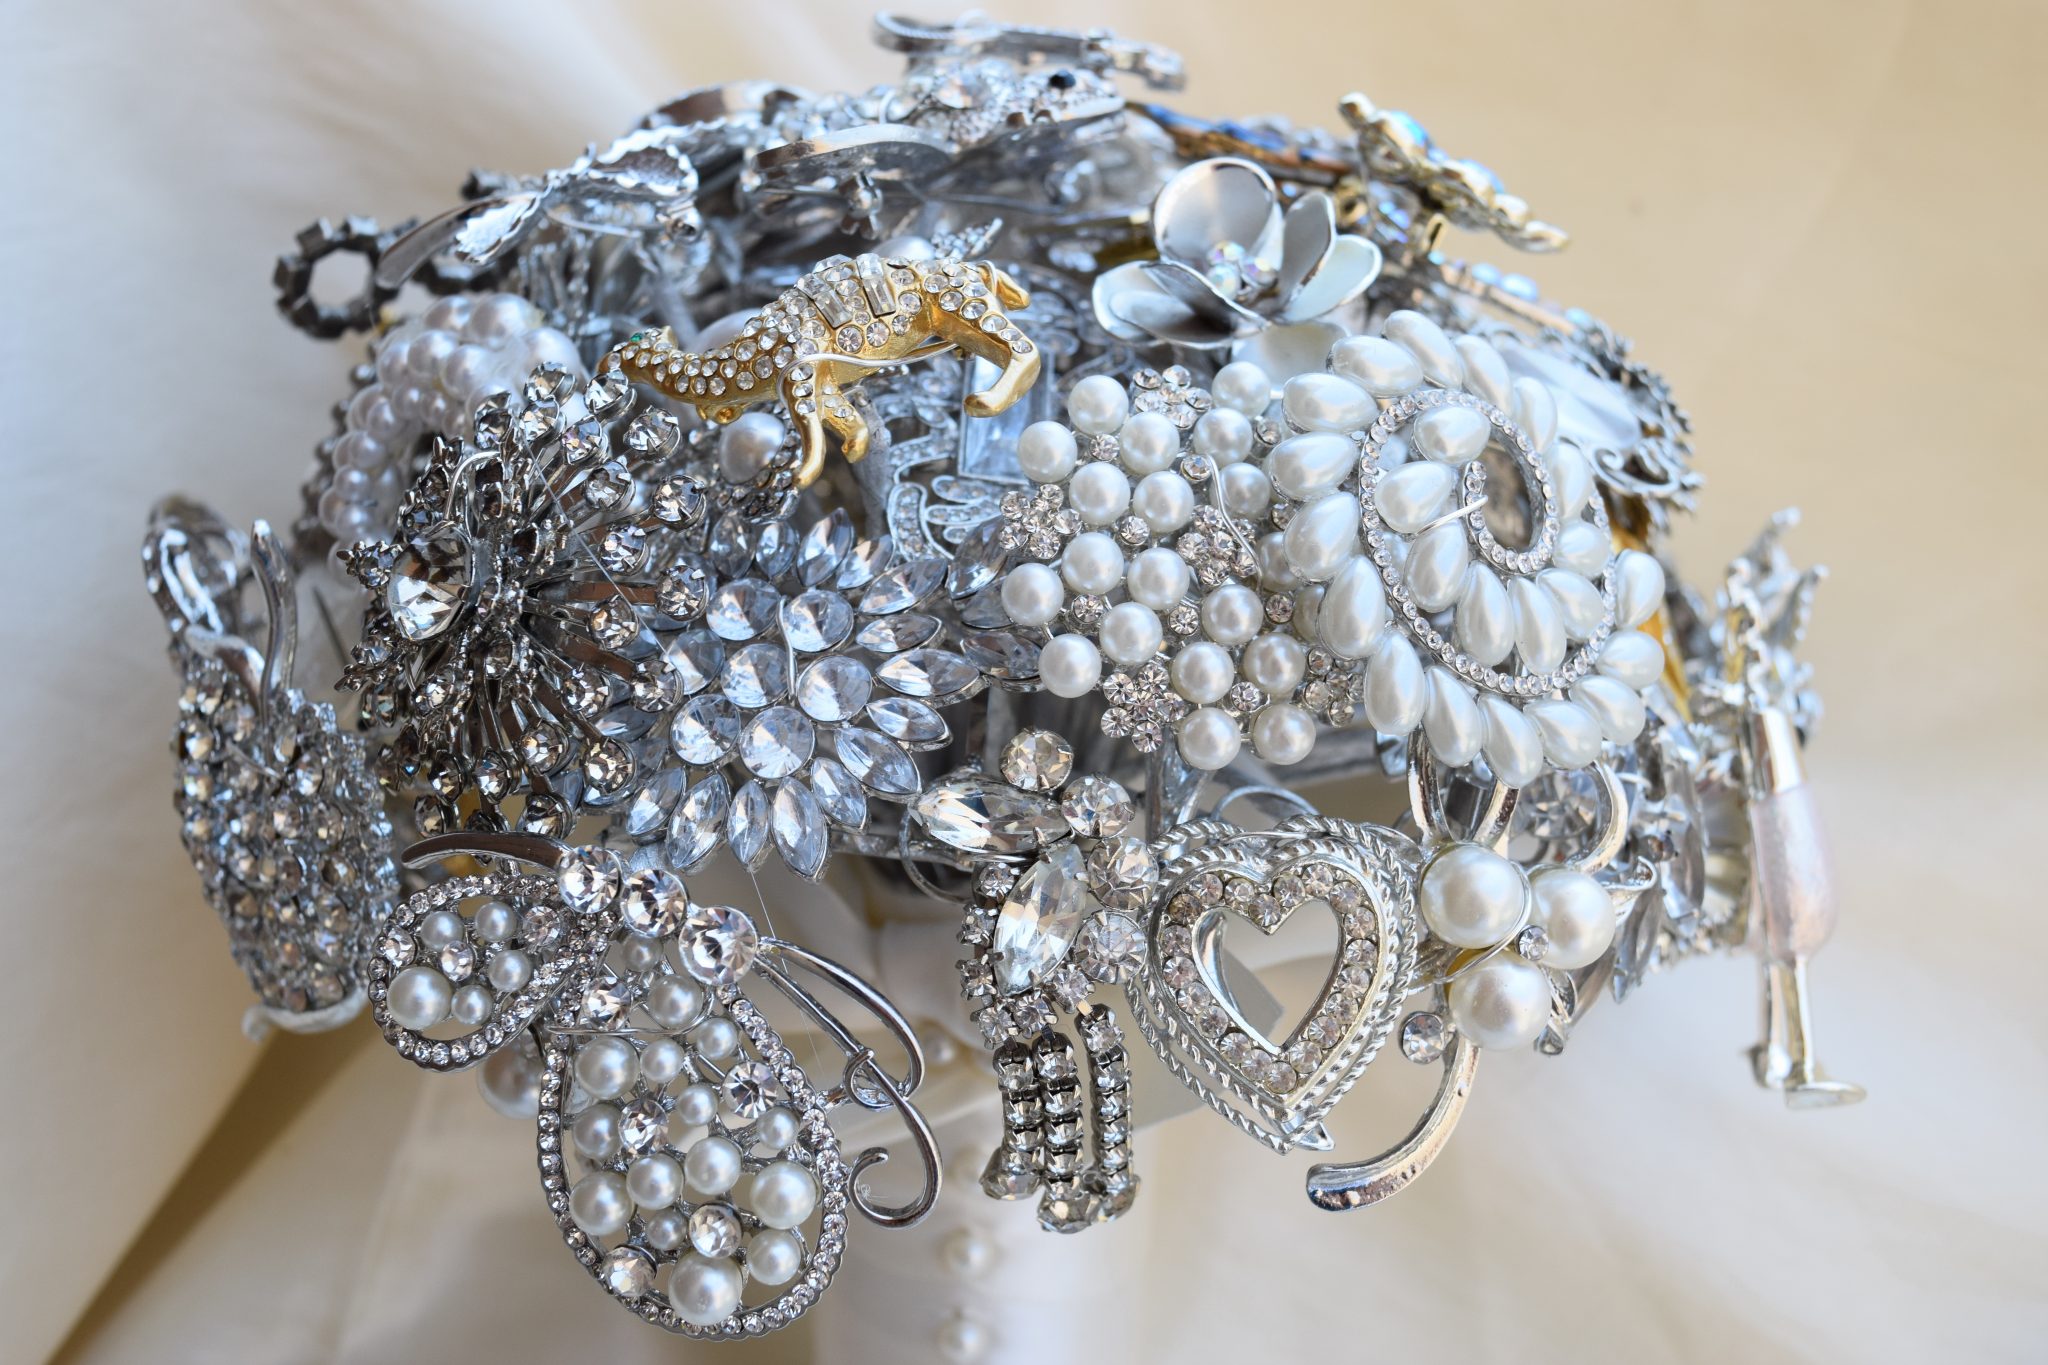 Detail image of brooch bouquet for the bride.